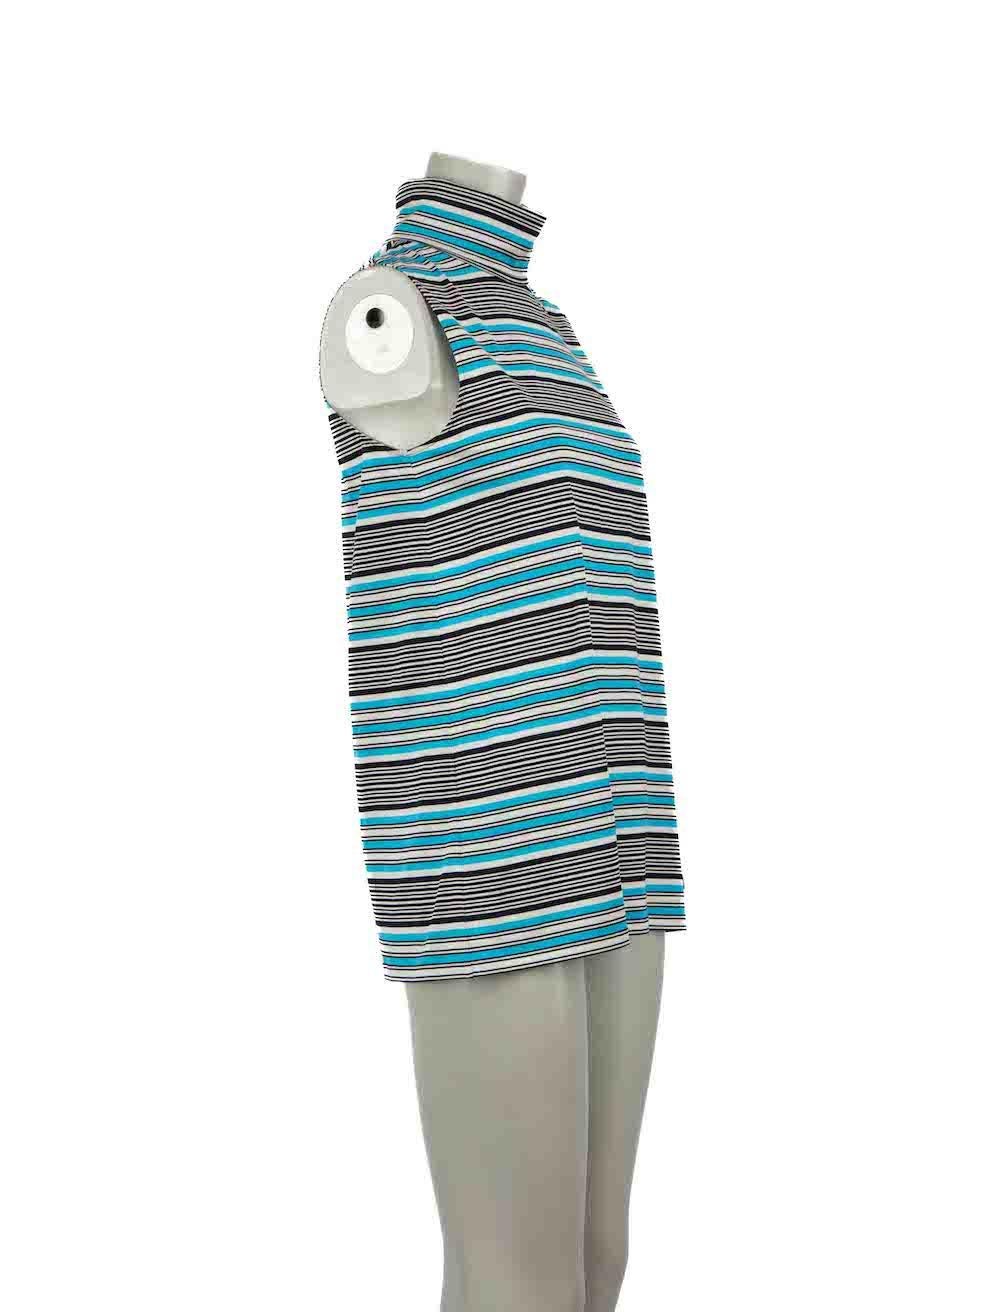 CONDITION is Very good. Minimal wear to top is evident. Minimal wear to the rear with small marks on this used Prada designer resale item.
 
Details
Blue
Cotton
Top
Striped pattern
Sleeveless
Turtle neck
Back zip fastening

Made in Italy
